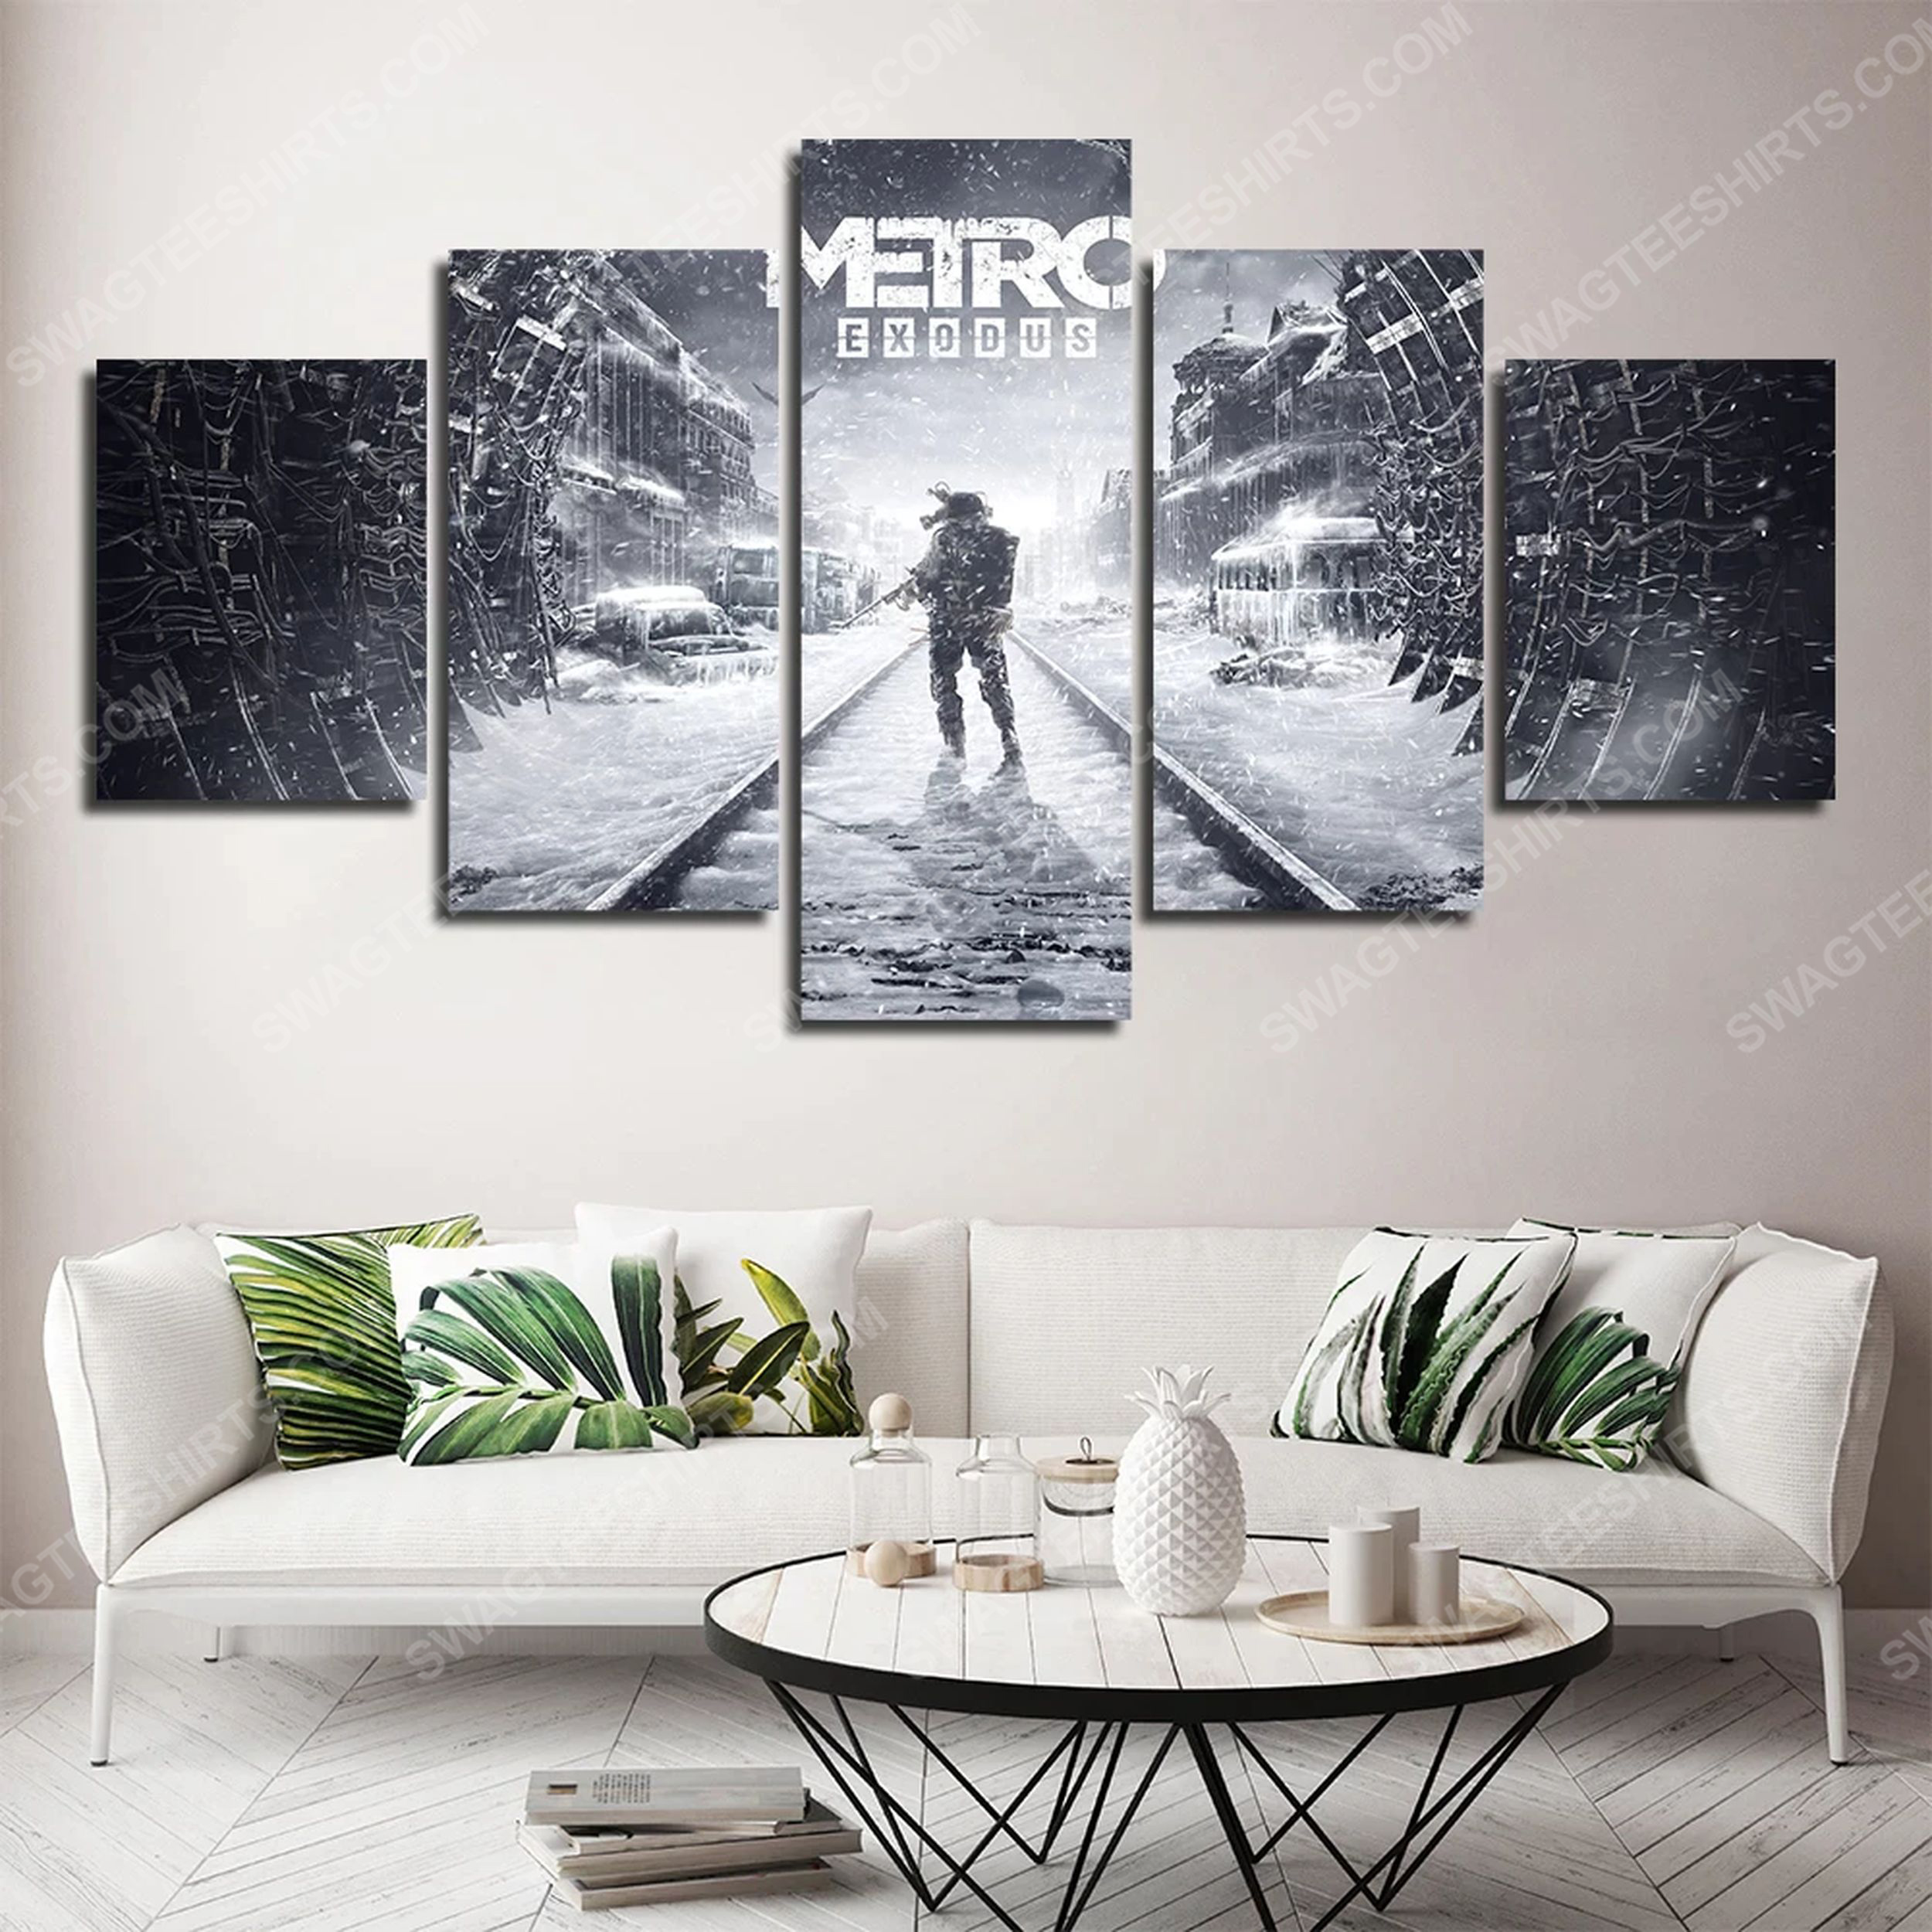 [special edition] Game room metro exodus print painting canvas wall art home decor – maria